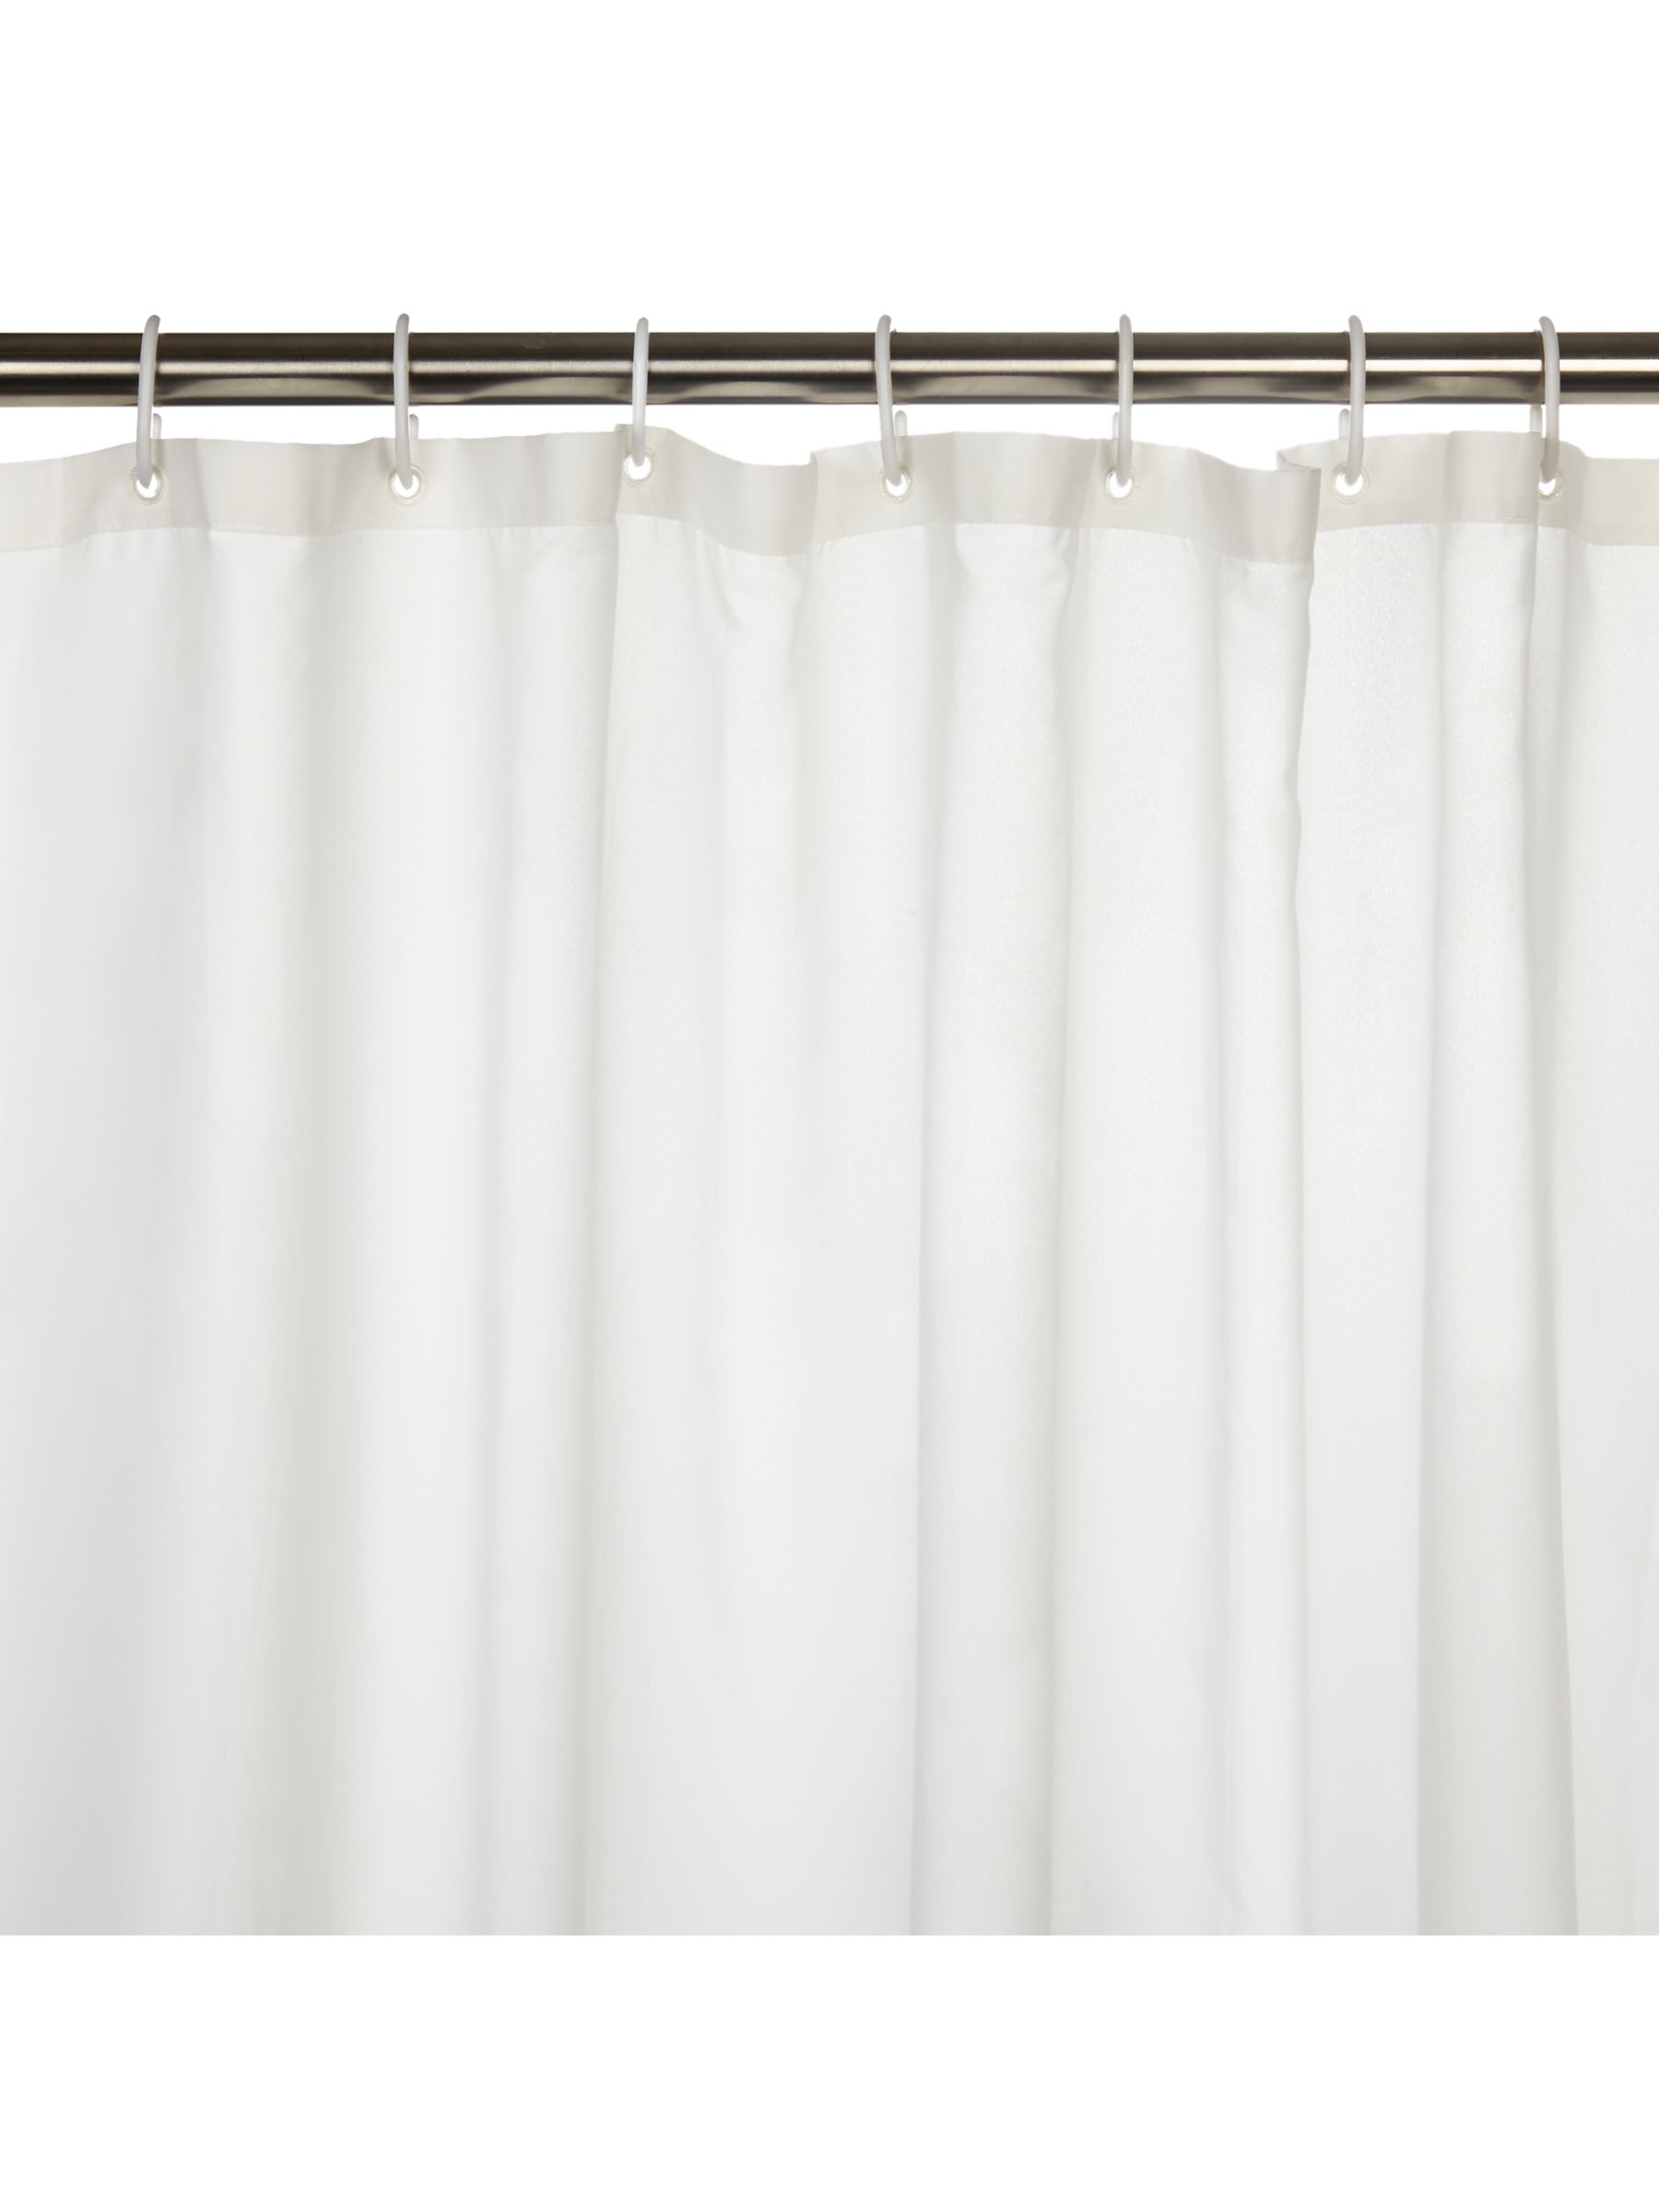 White Shower Curtains John Lewis, Are Peva Shower Curtains Recyclable